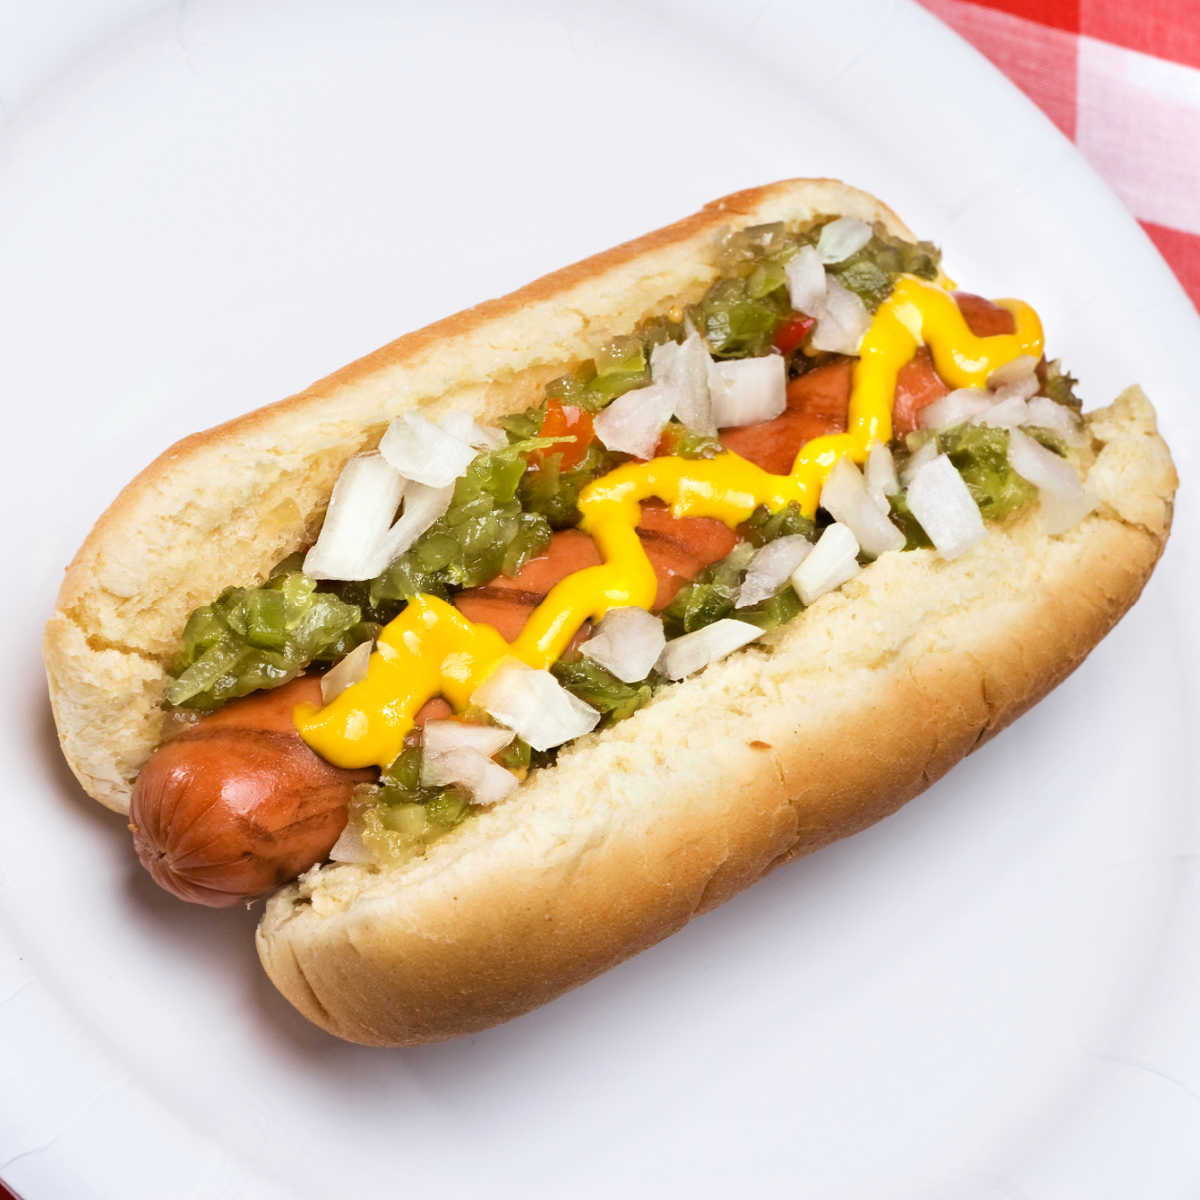 Hot dog in a bun with mustard and zucchini relish and chopped onion on white plate and red checked table cloth